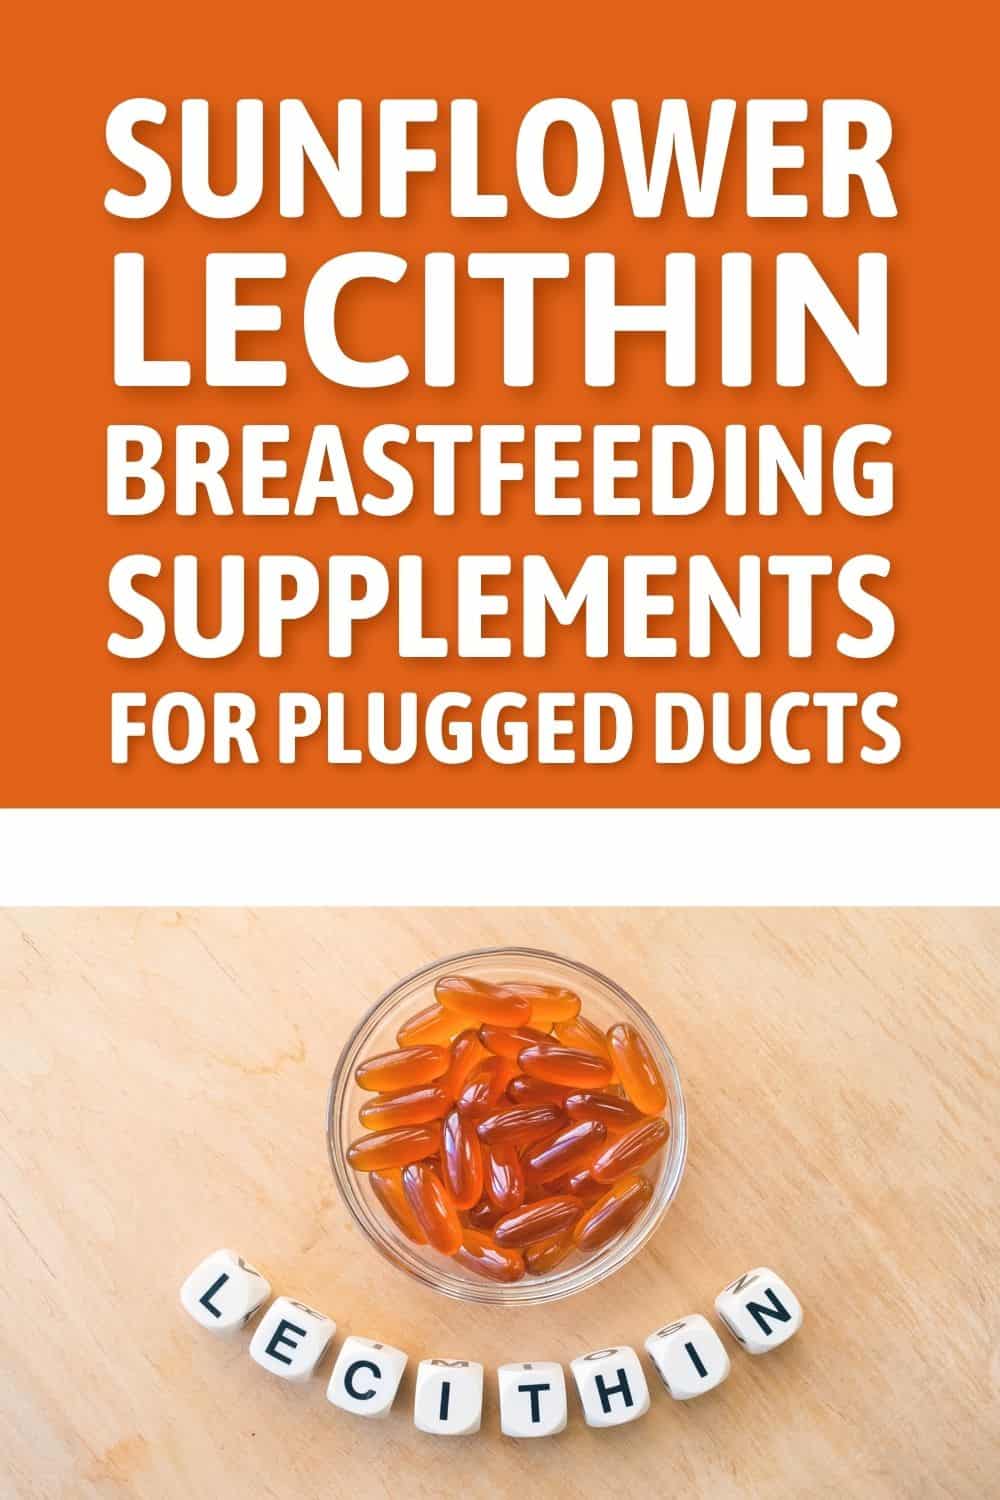 Sunflower Lecithin Breastfeeding Supplements For Plugged Ducts